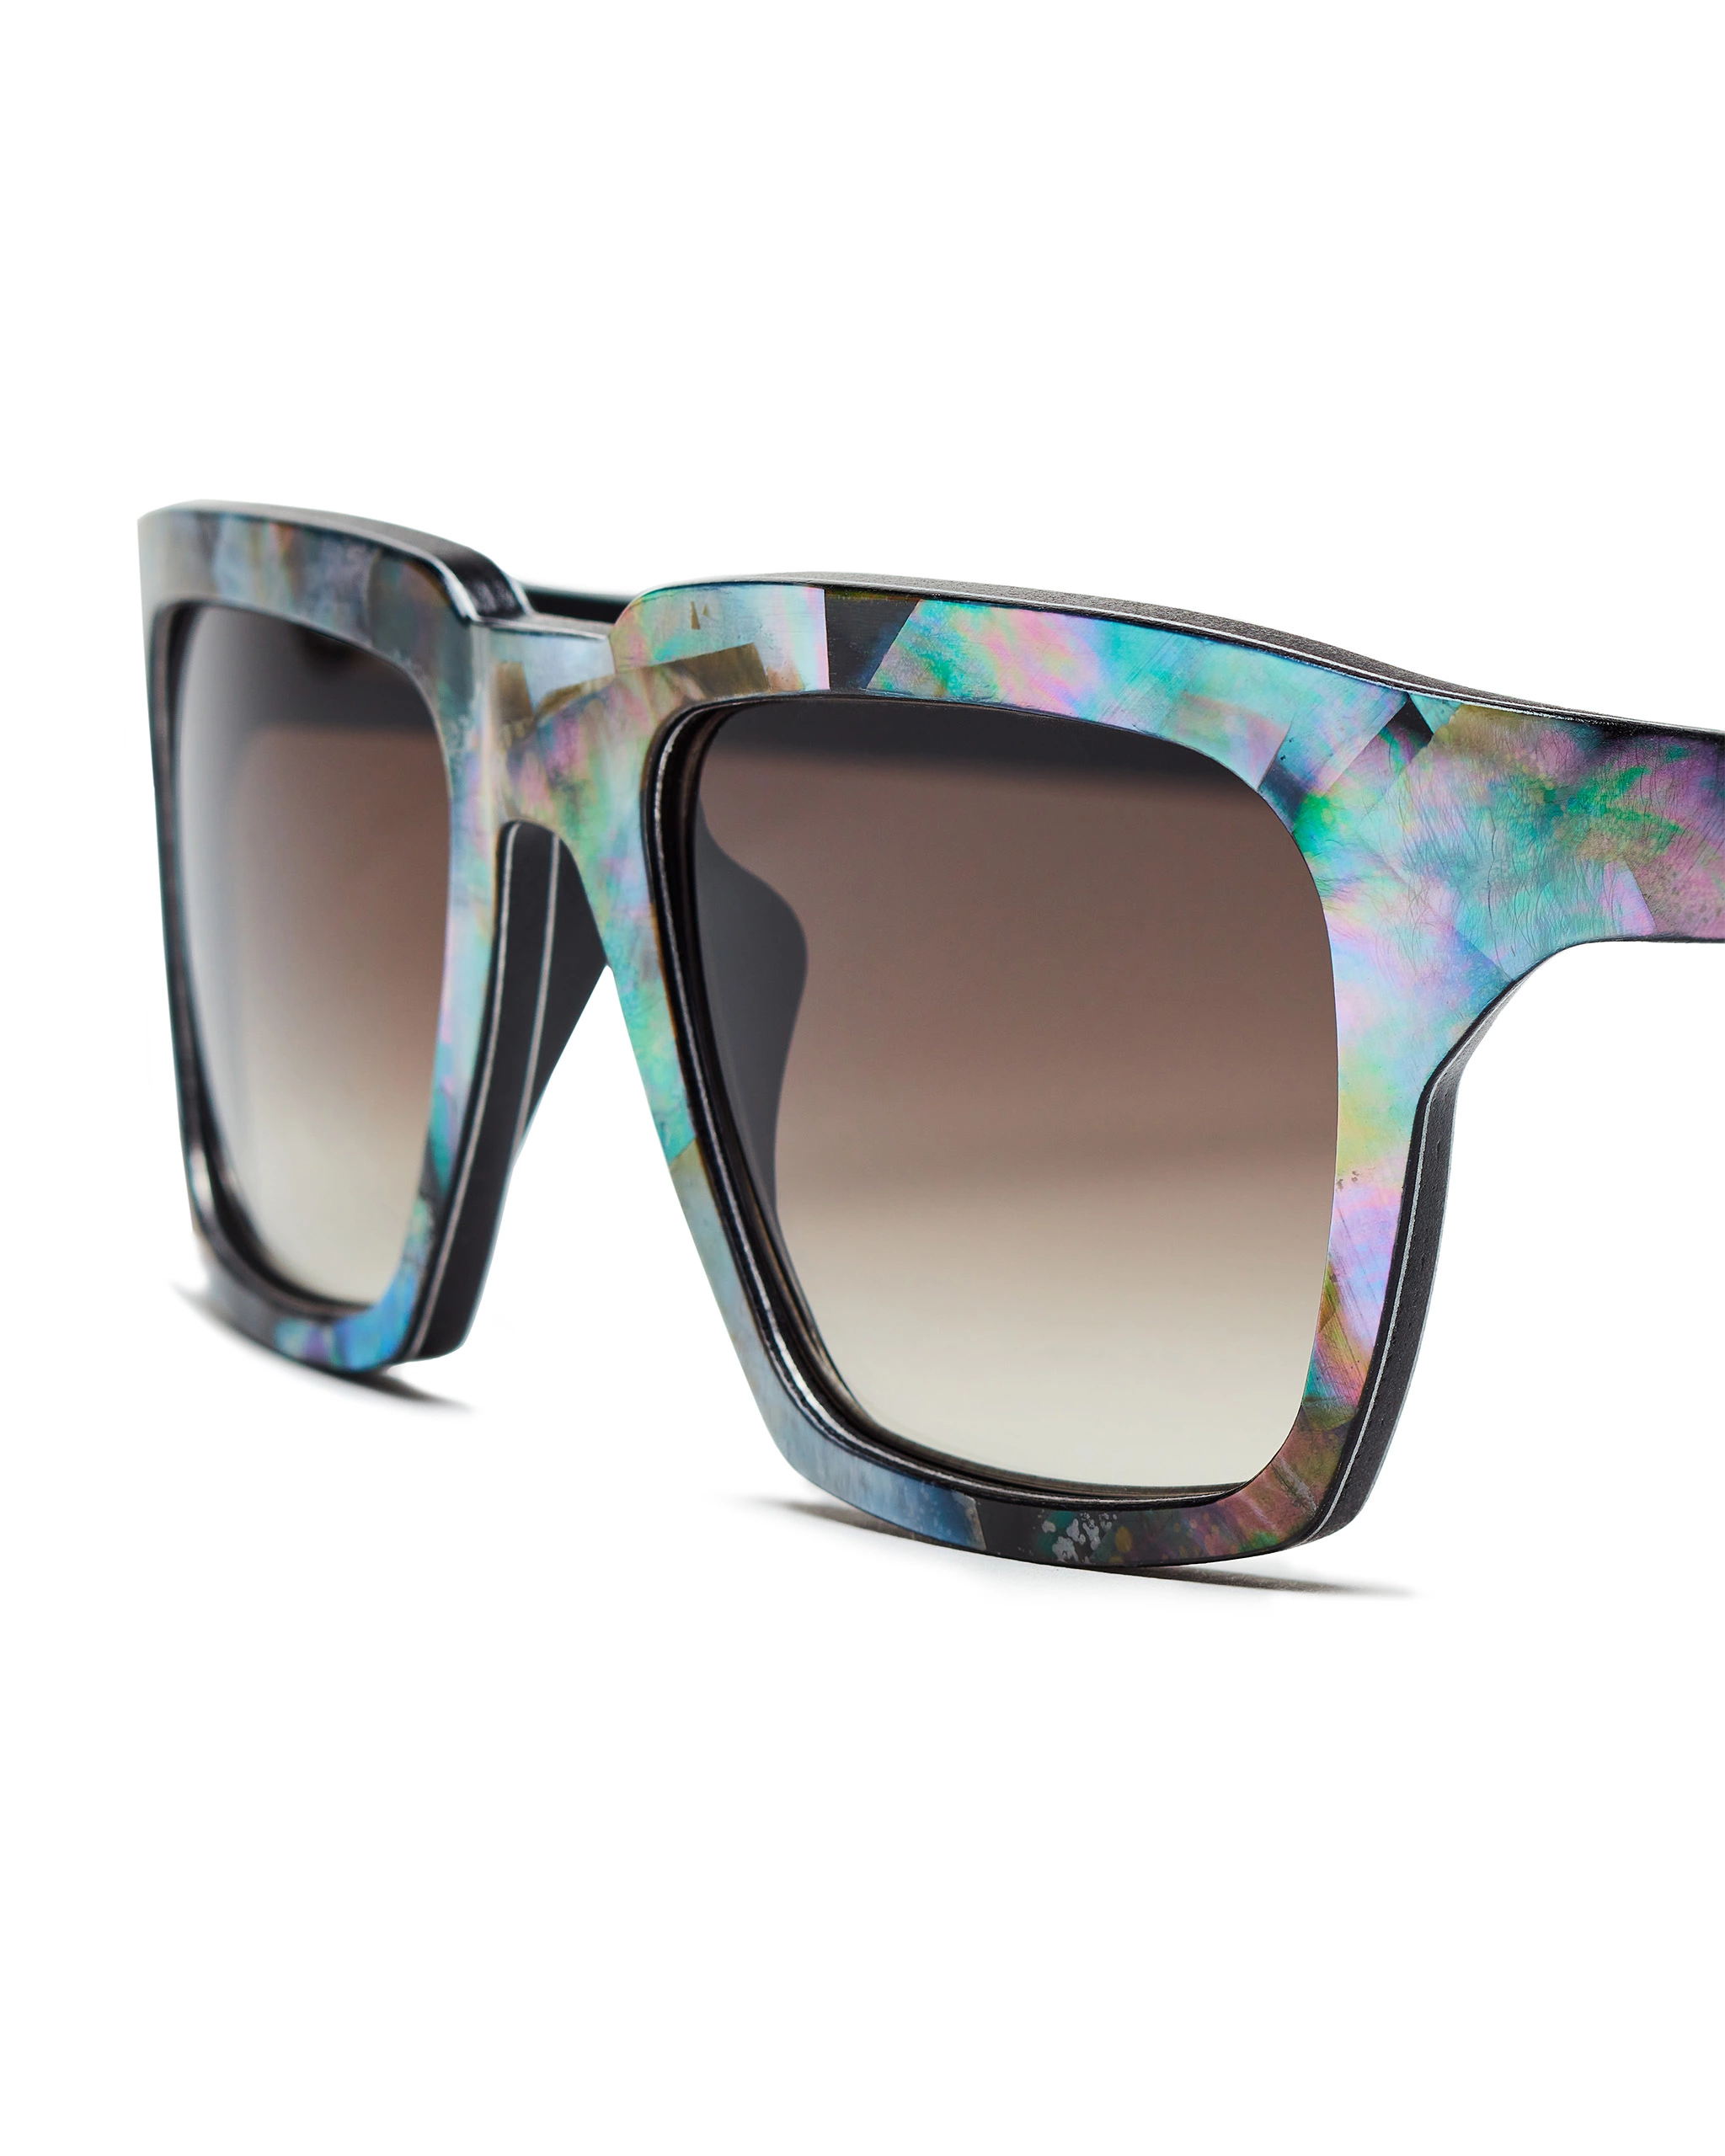 a pair of mother of pearl sunglasses with a floral pattern